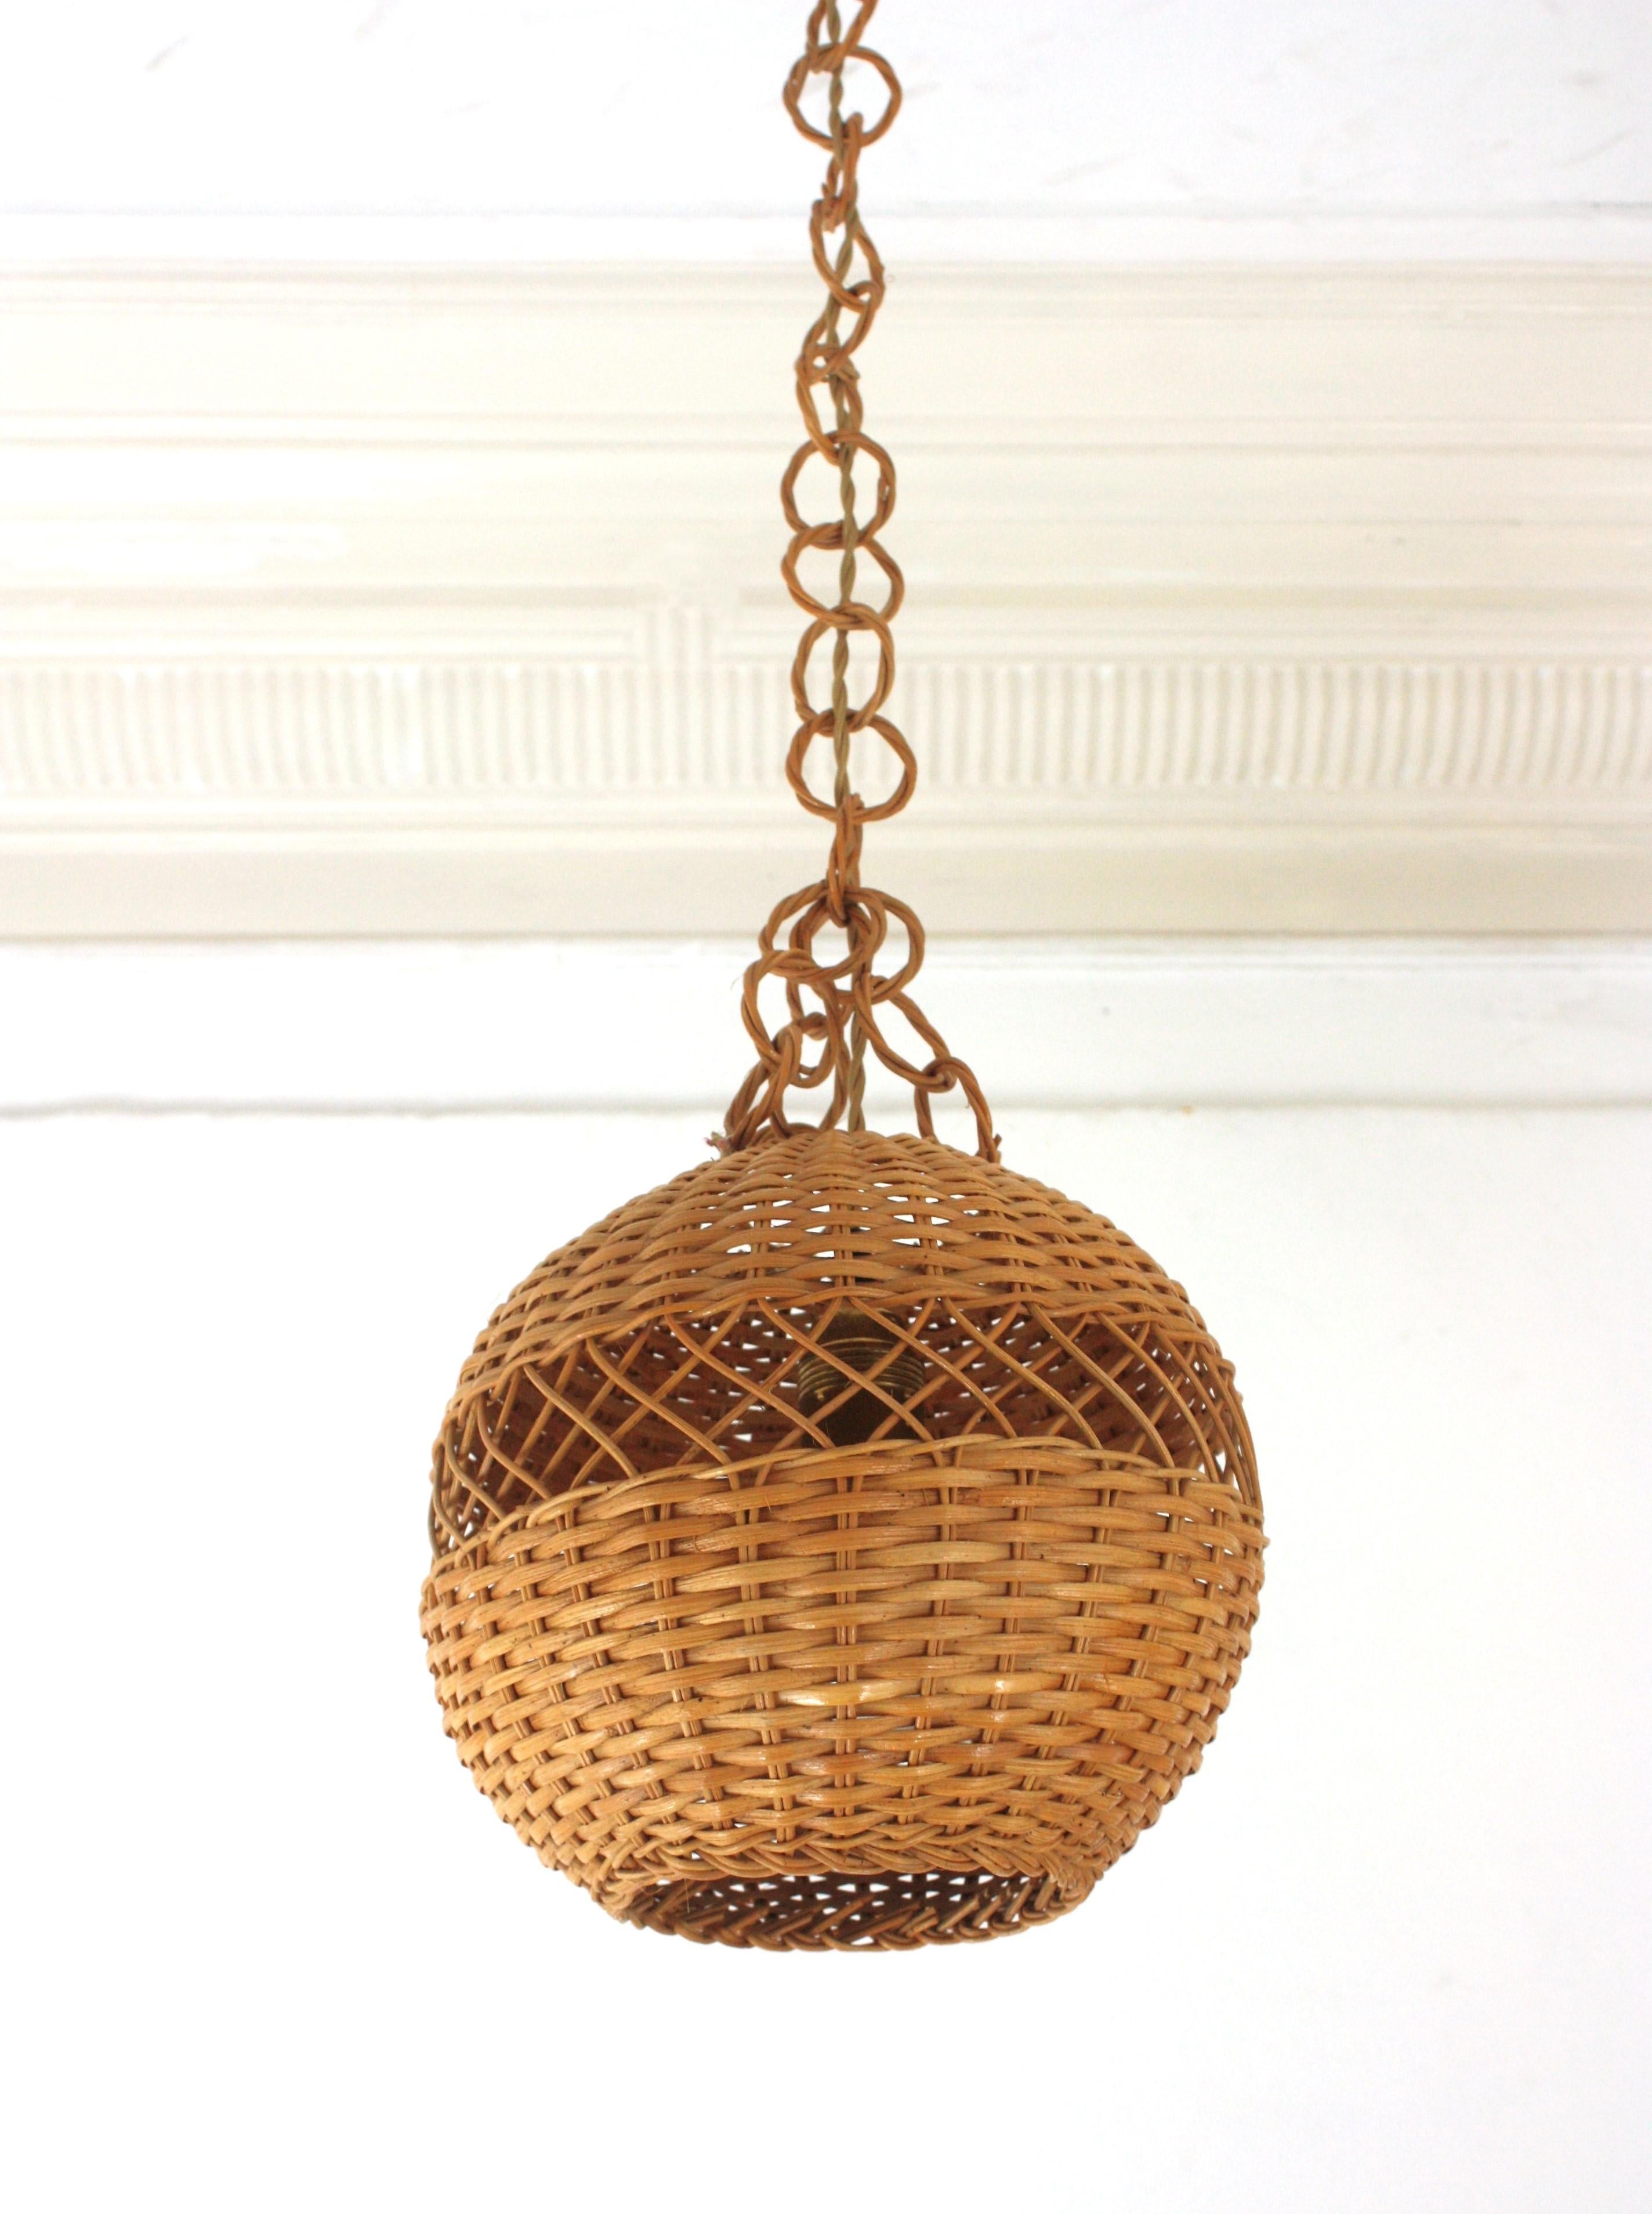 20th Century Pair of Handwoven Wicker Globe Pendant Lights or Lanterns For Sale